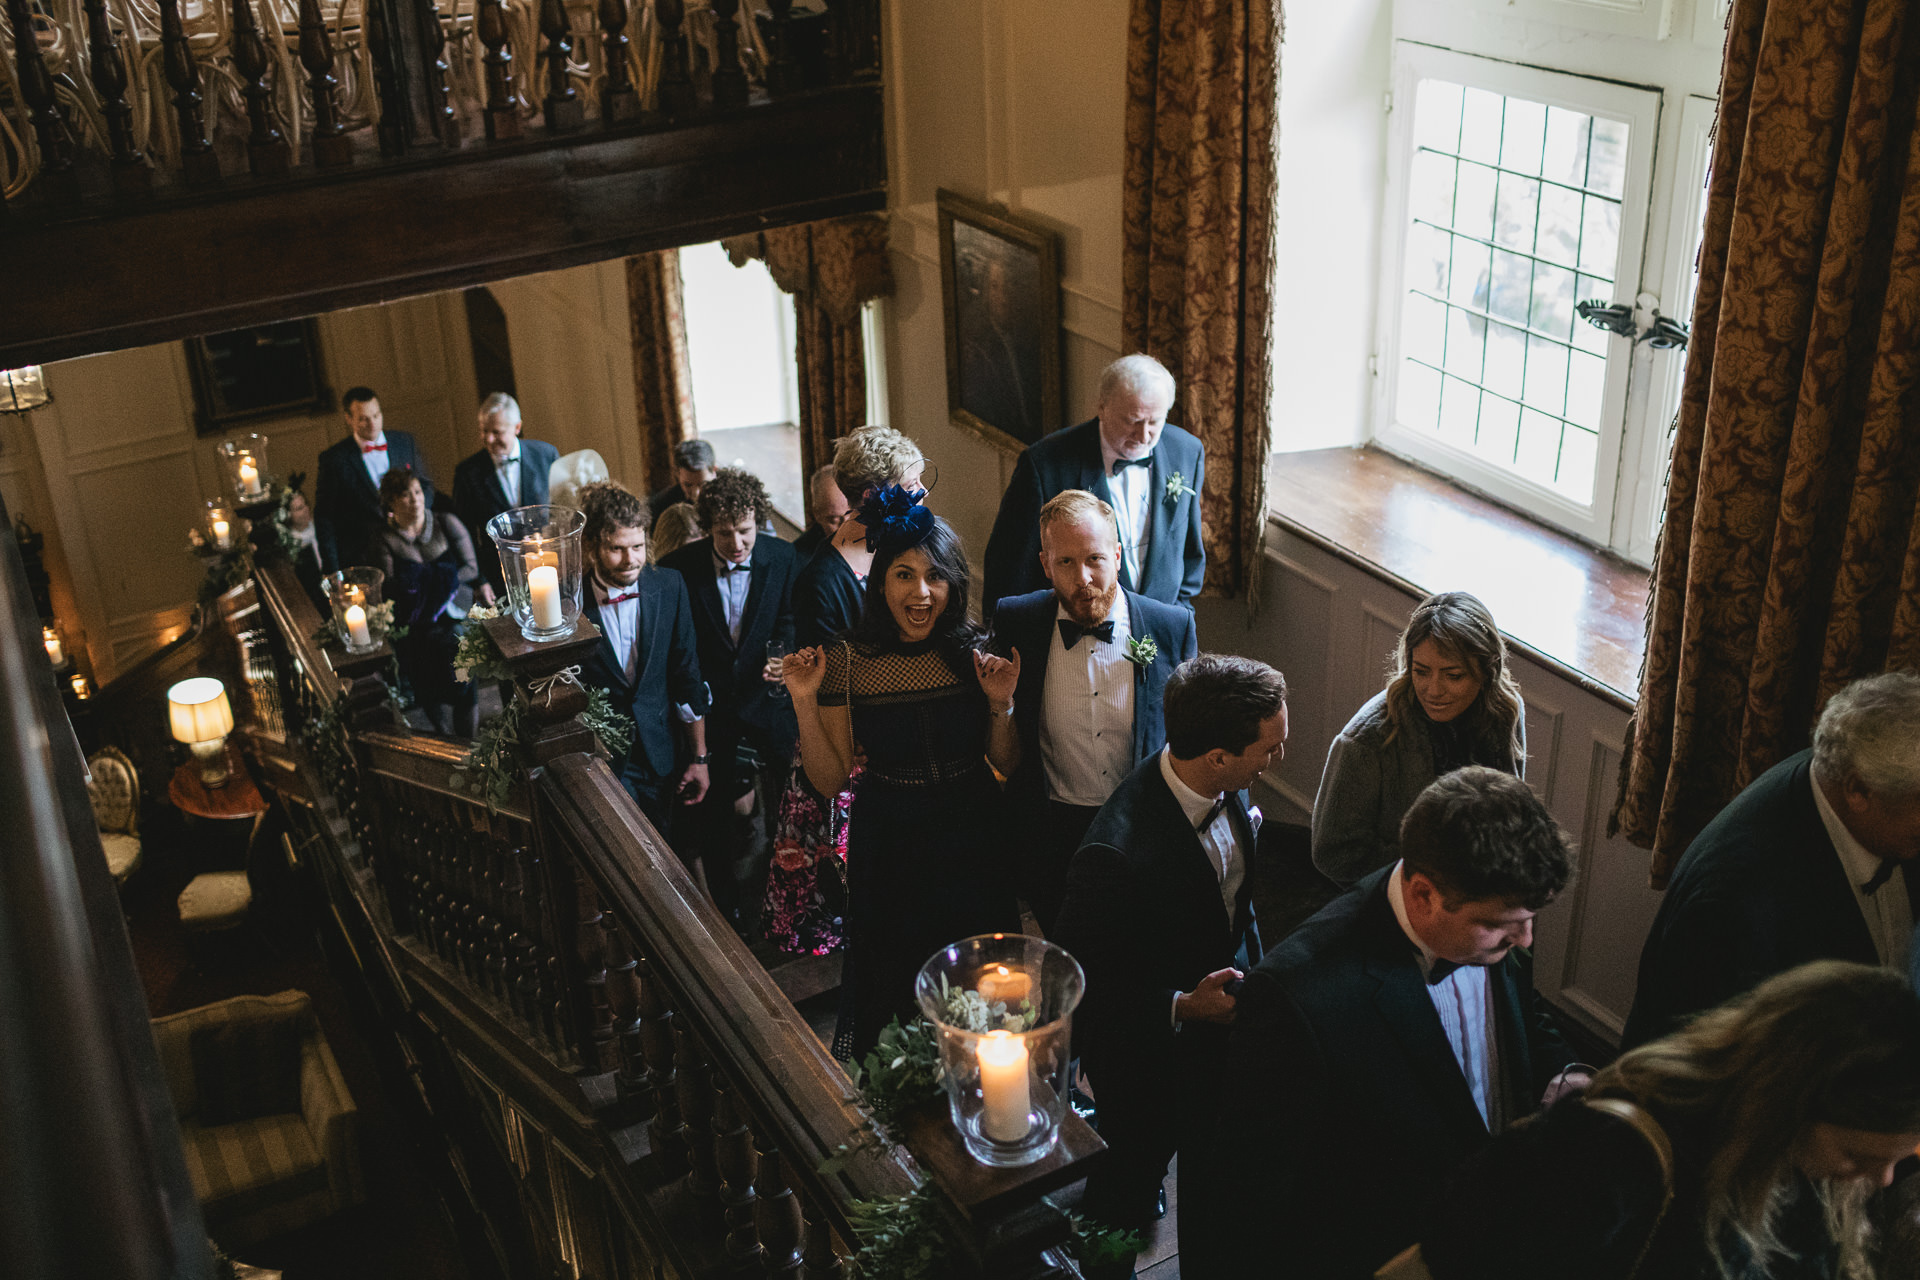 Wedding guests walking up a wide staircase